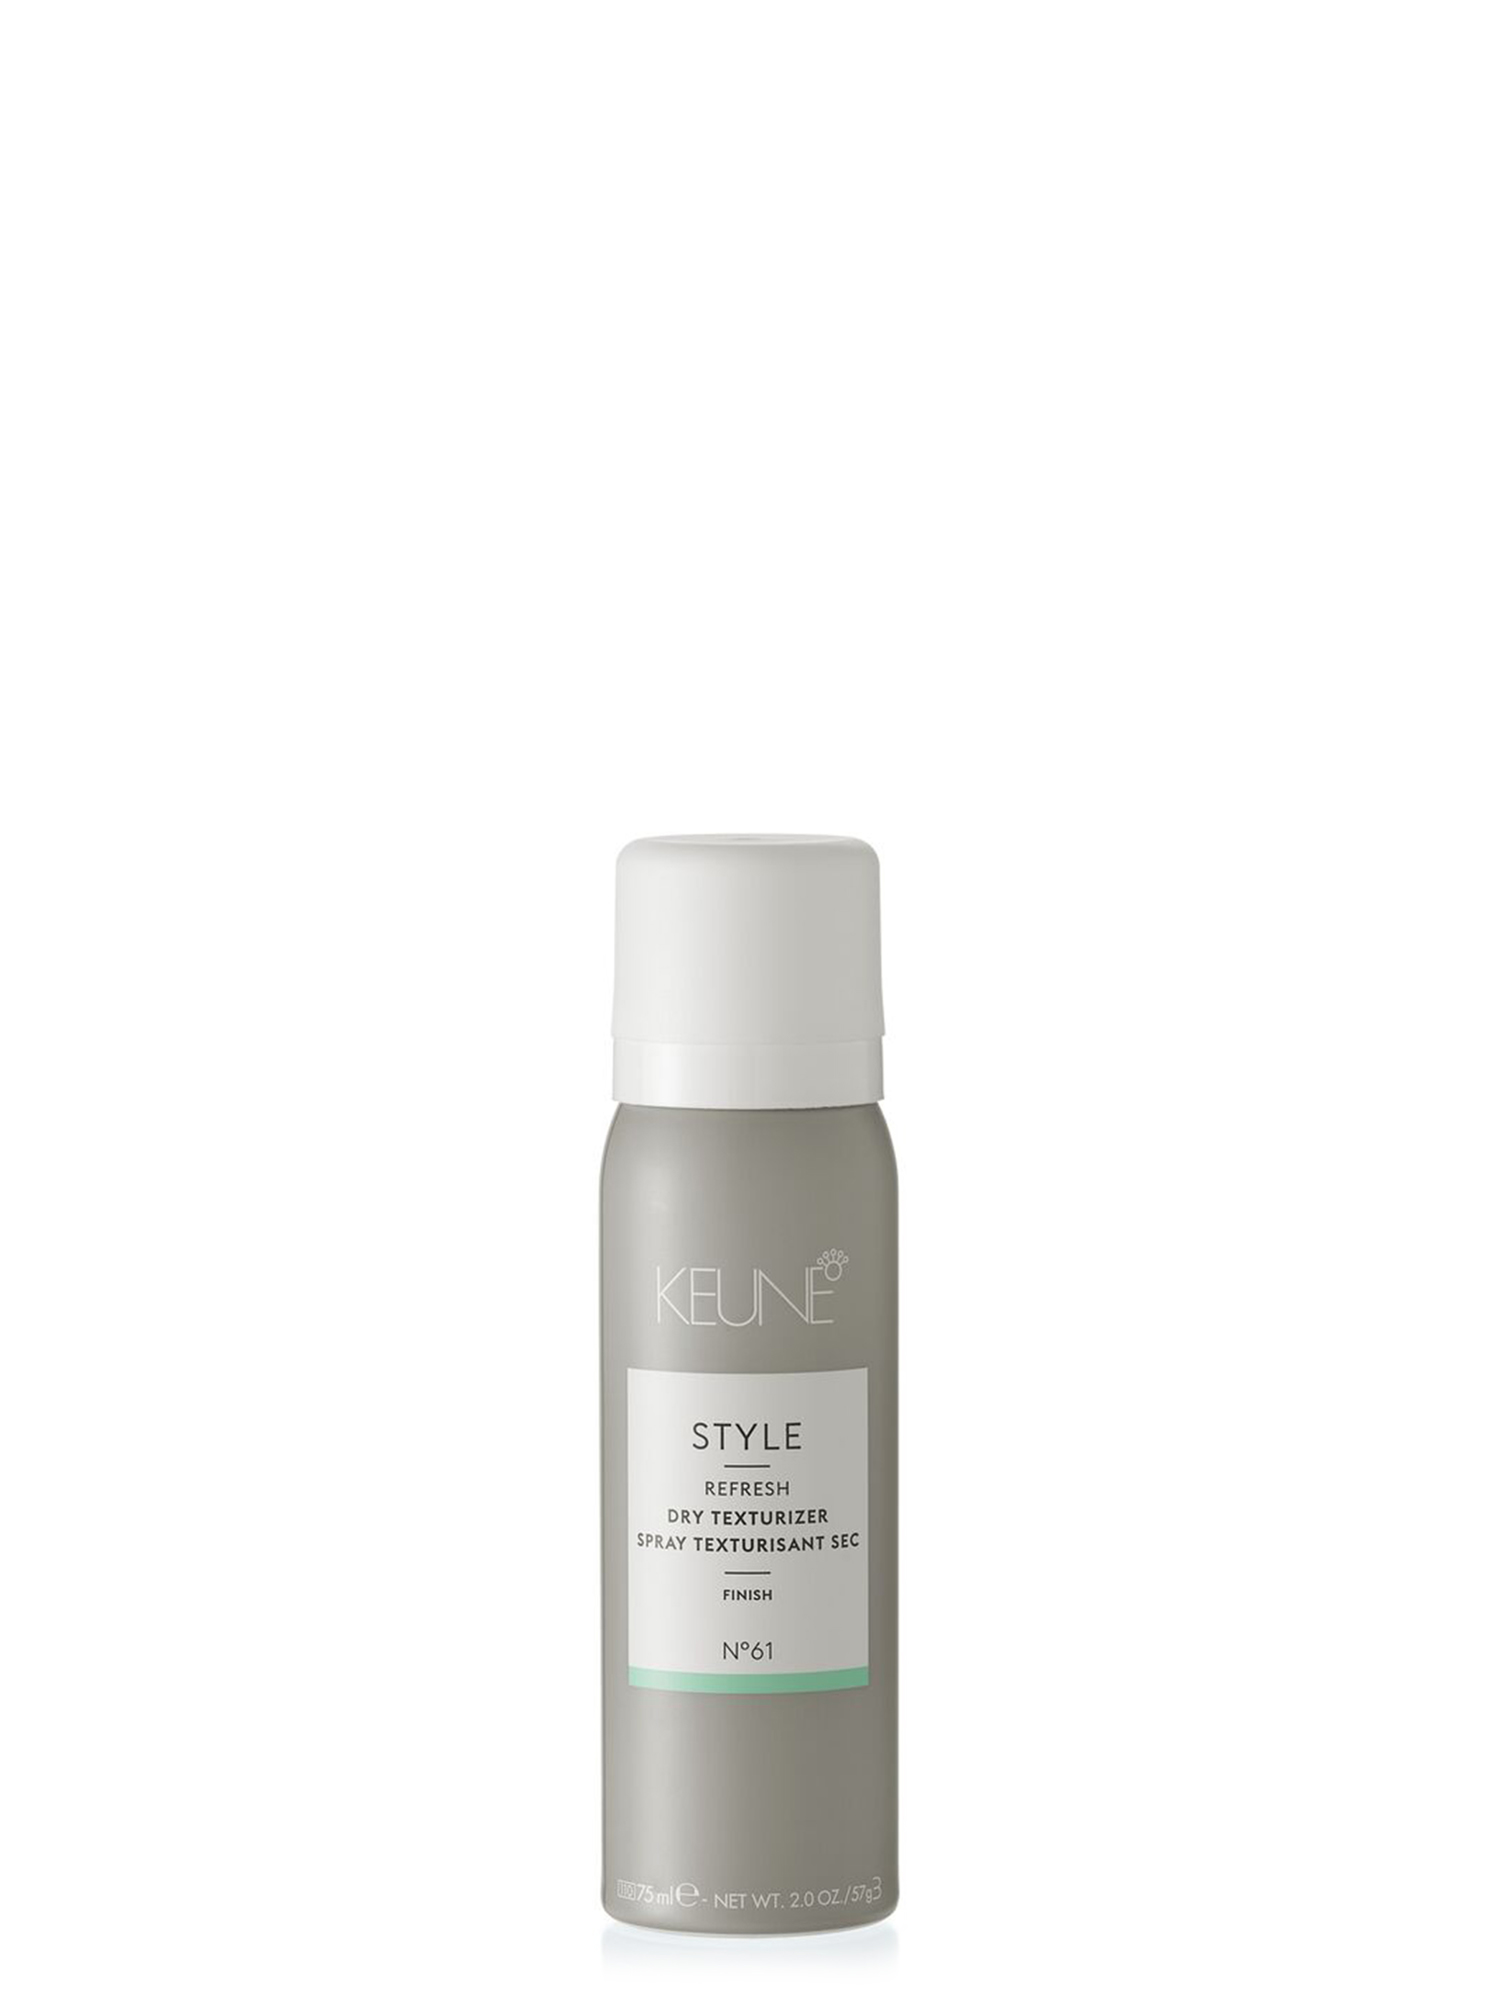 STYLE DRY TEXTURIZER: Matte, dry texture spray for volume and a tousled structure. Perfect for oily hair. Now available for hair styling on keune.ch.